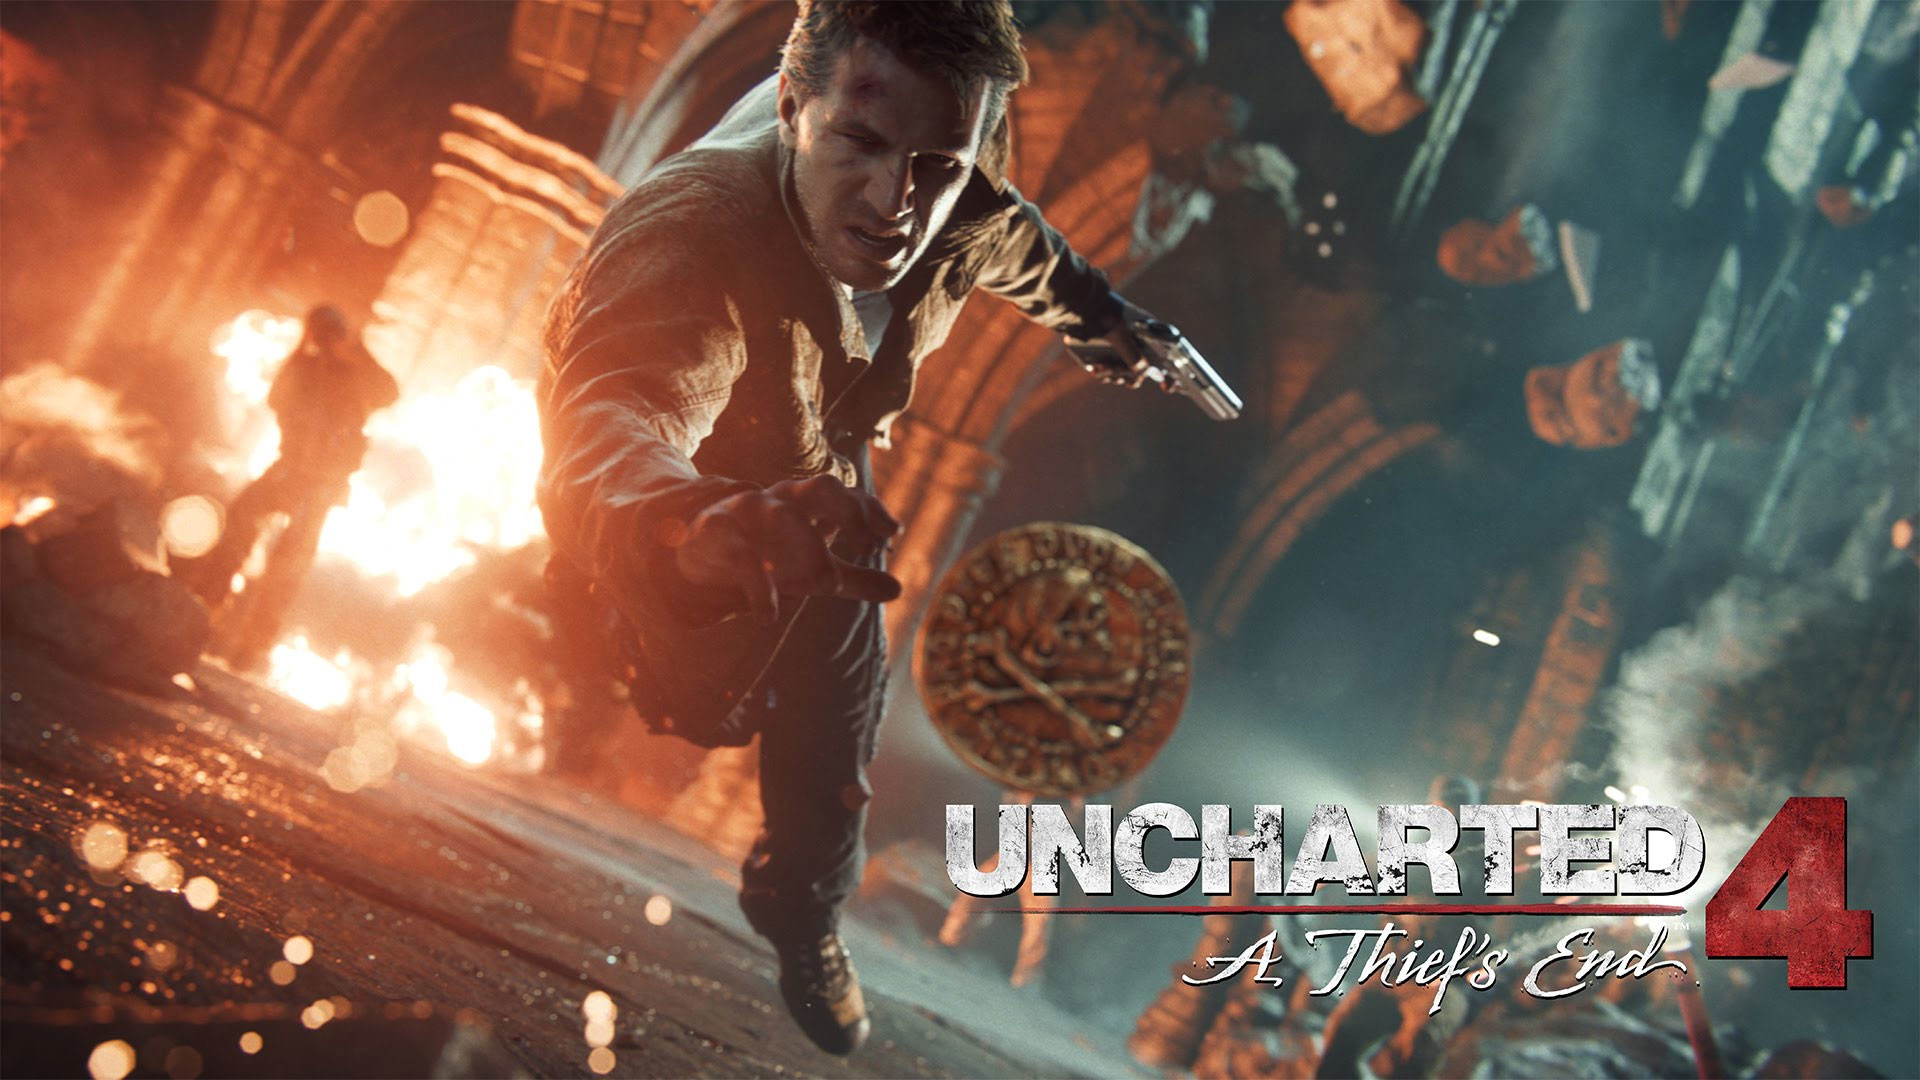 1920x1080 Uncharted 4 A Thief's End 4K Wallpaper ...